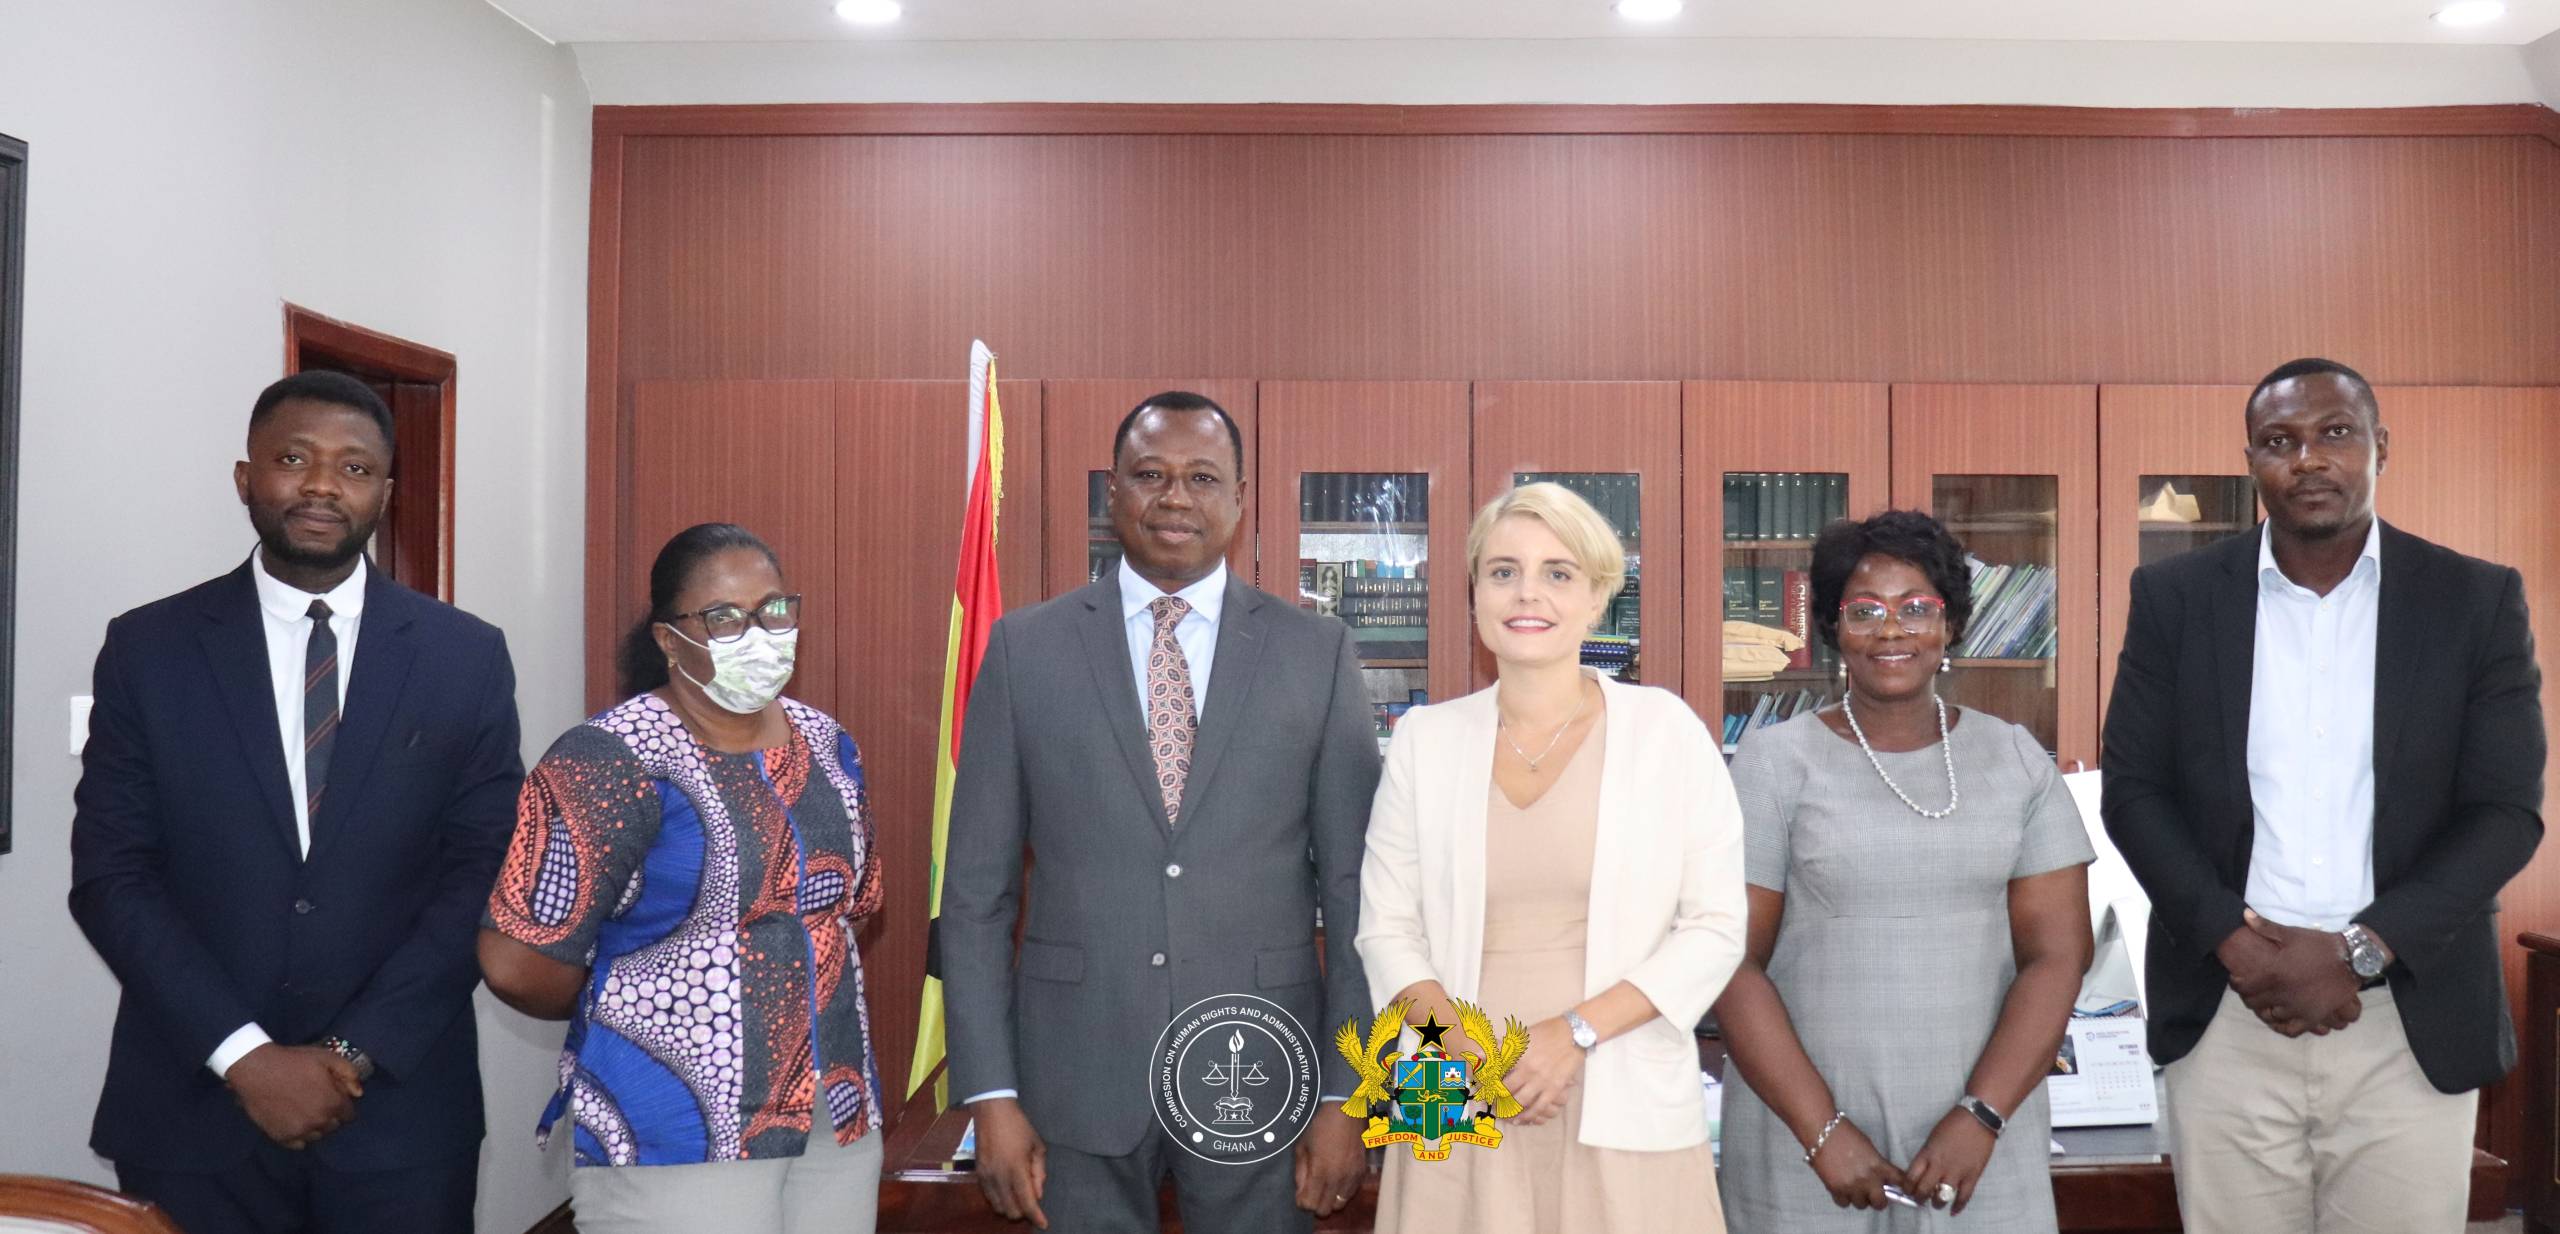 CHRAJ AND THE EMBASSY OF SWITZERLAND COLLABORATE TO PROMOTE HUMAN RIGHTS IN GHANA